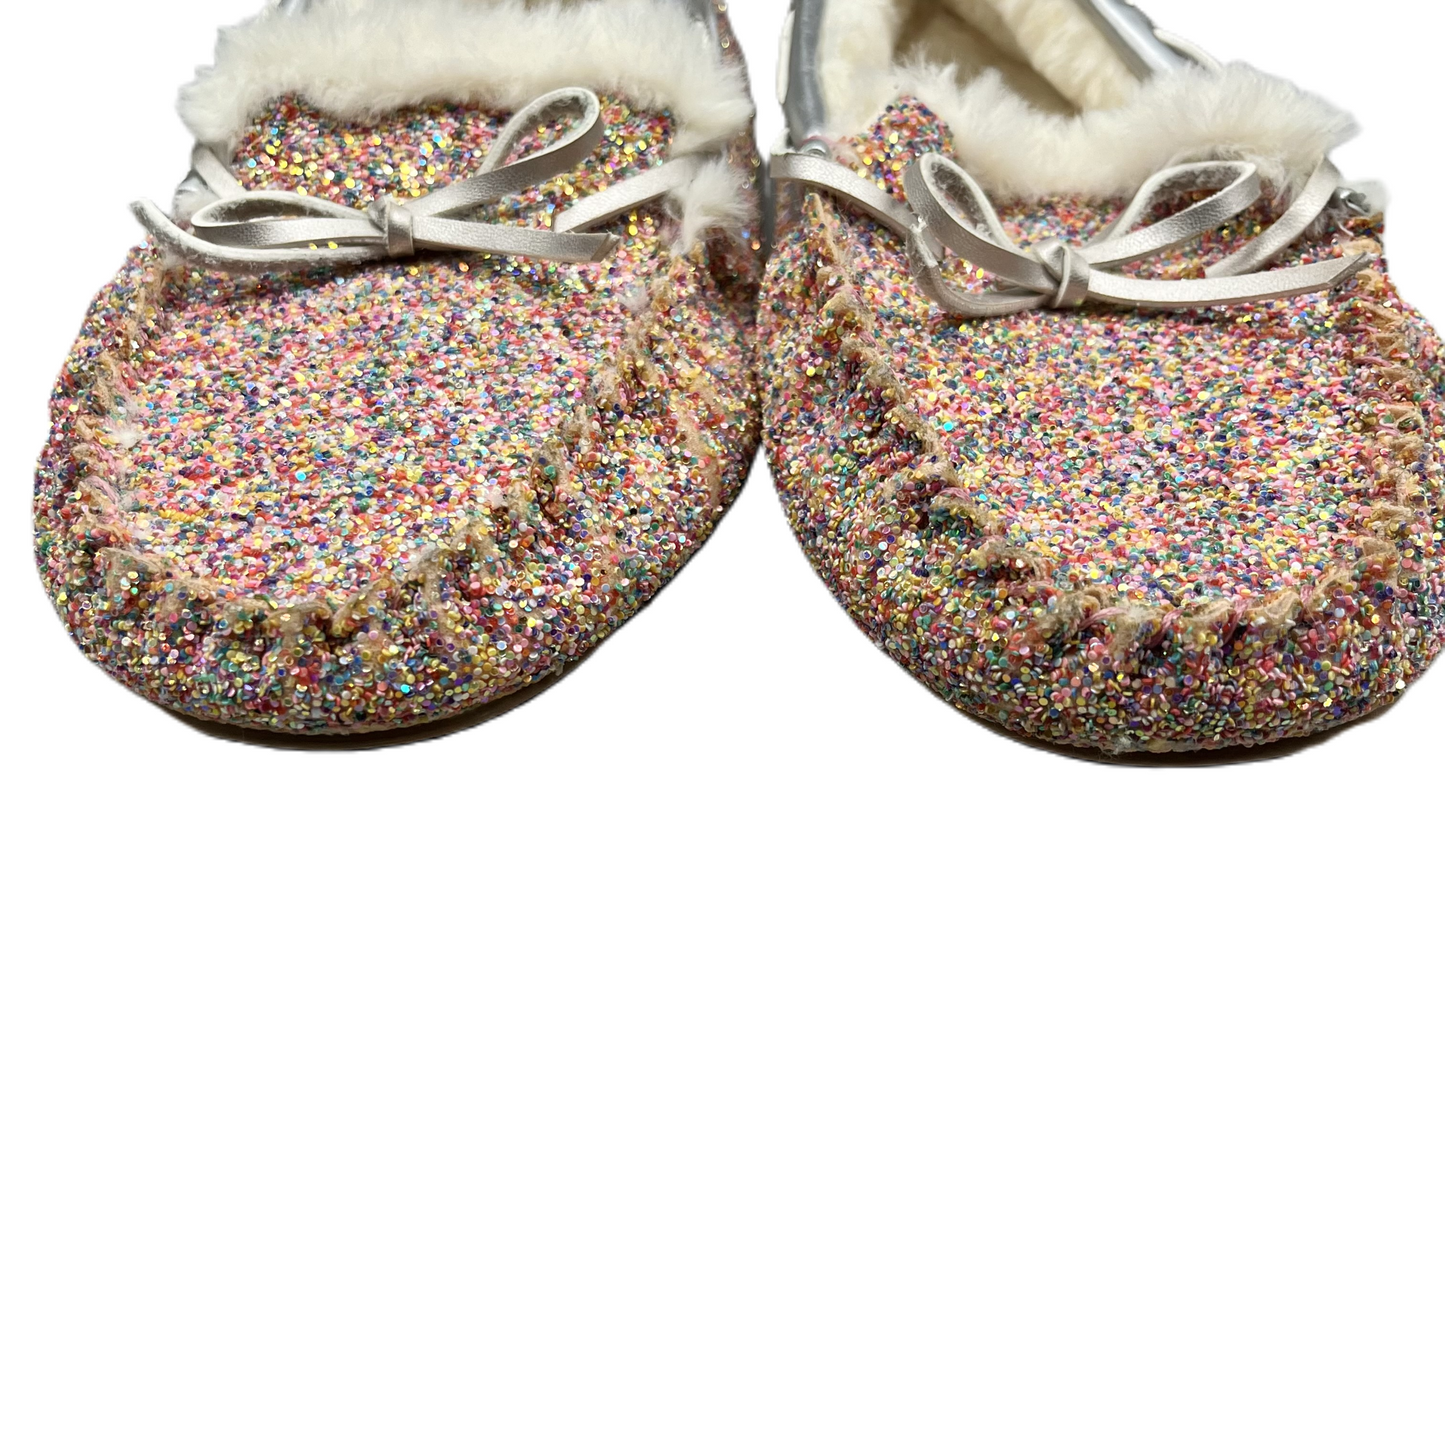 Slippers By Torrid  Size: 9.5